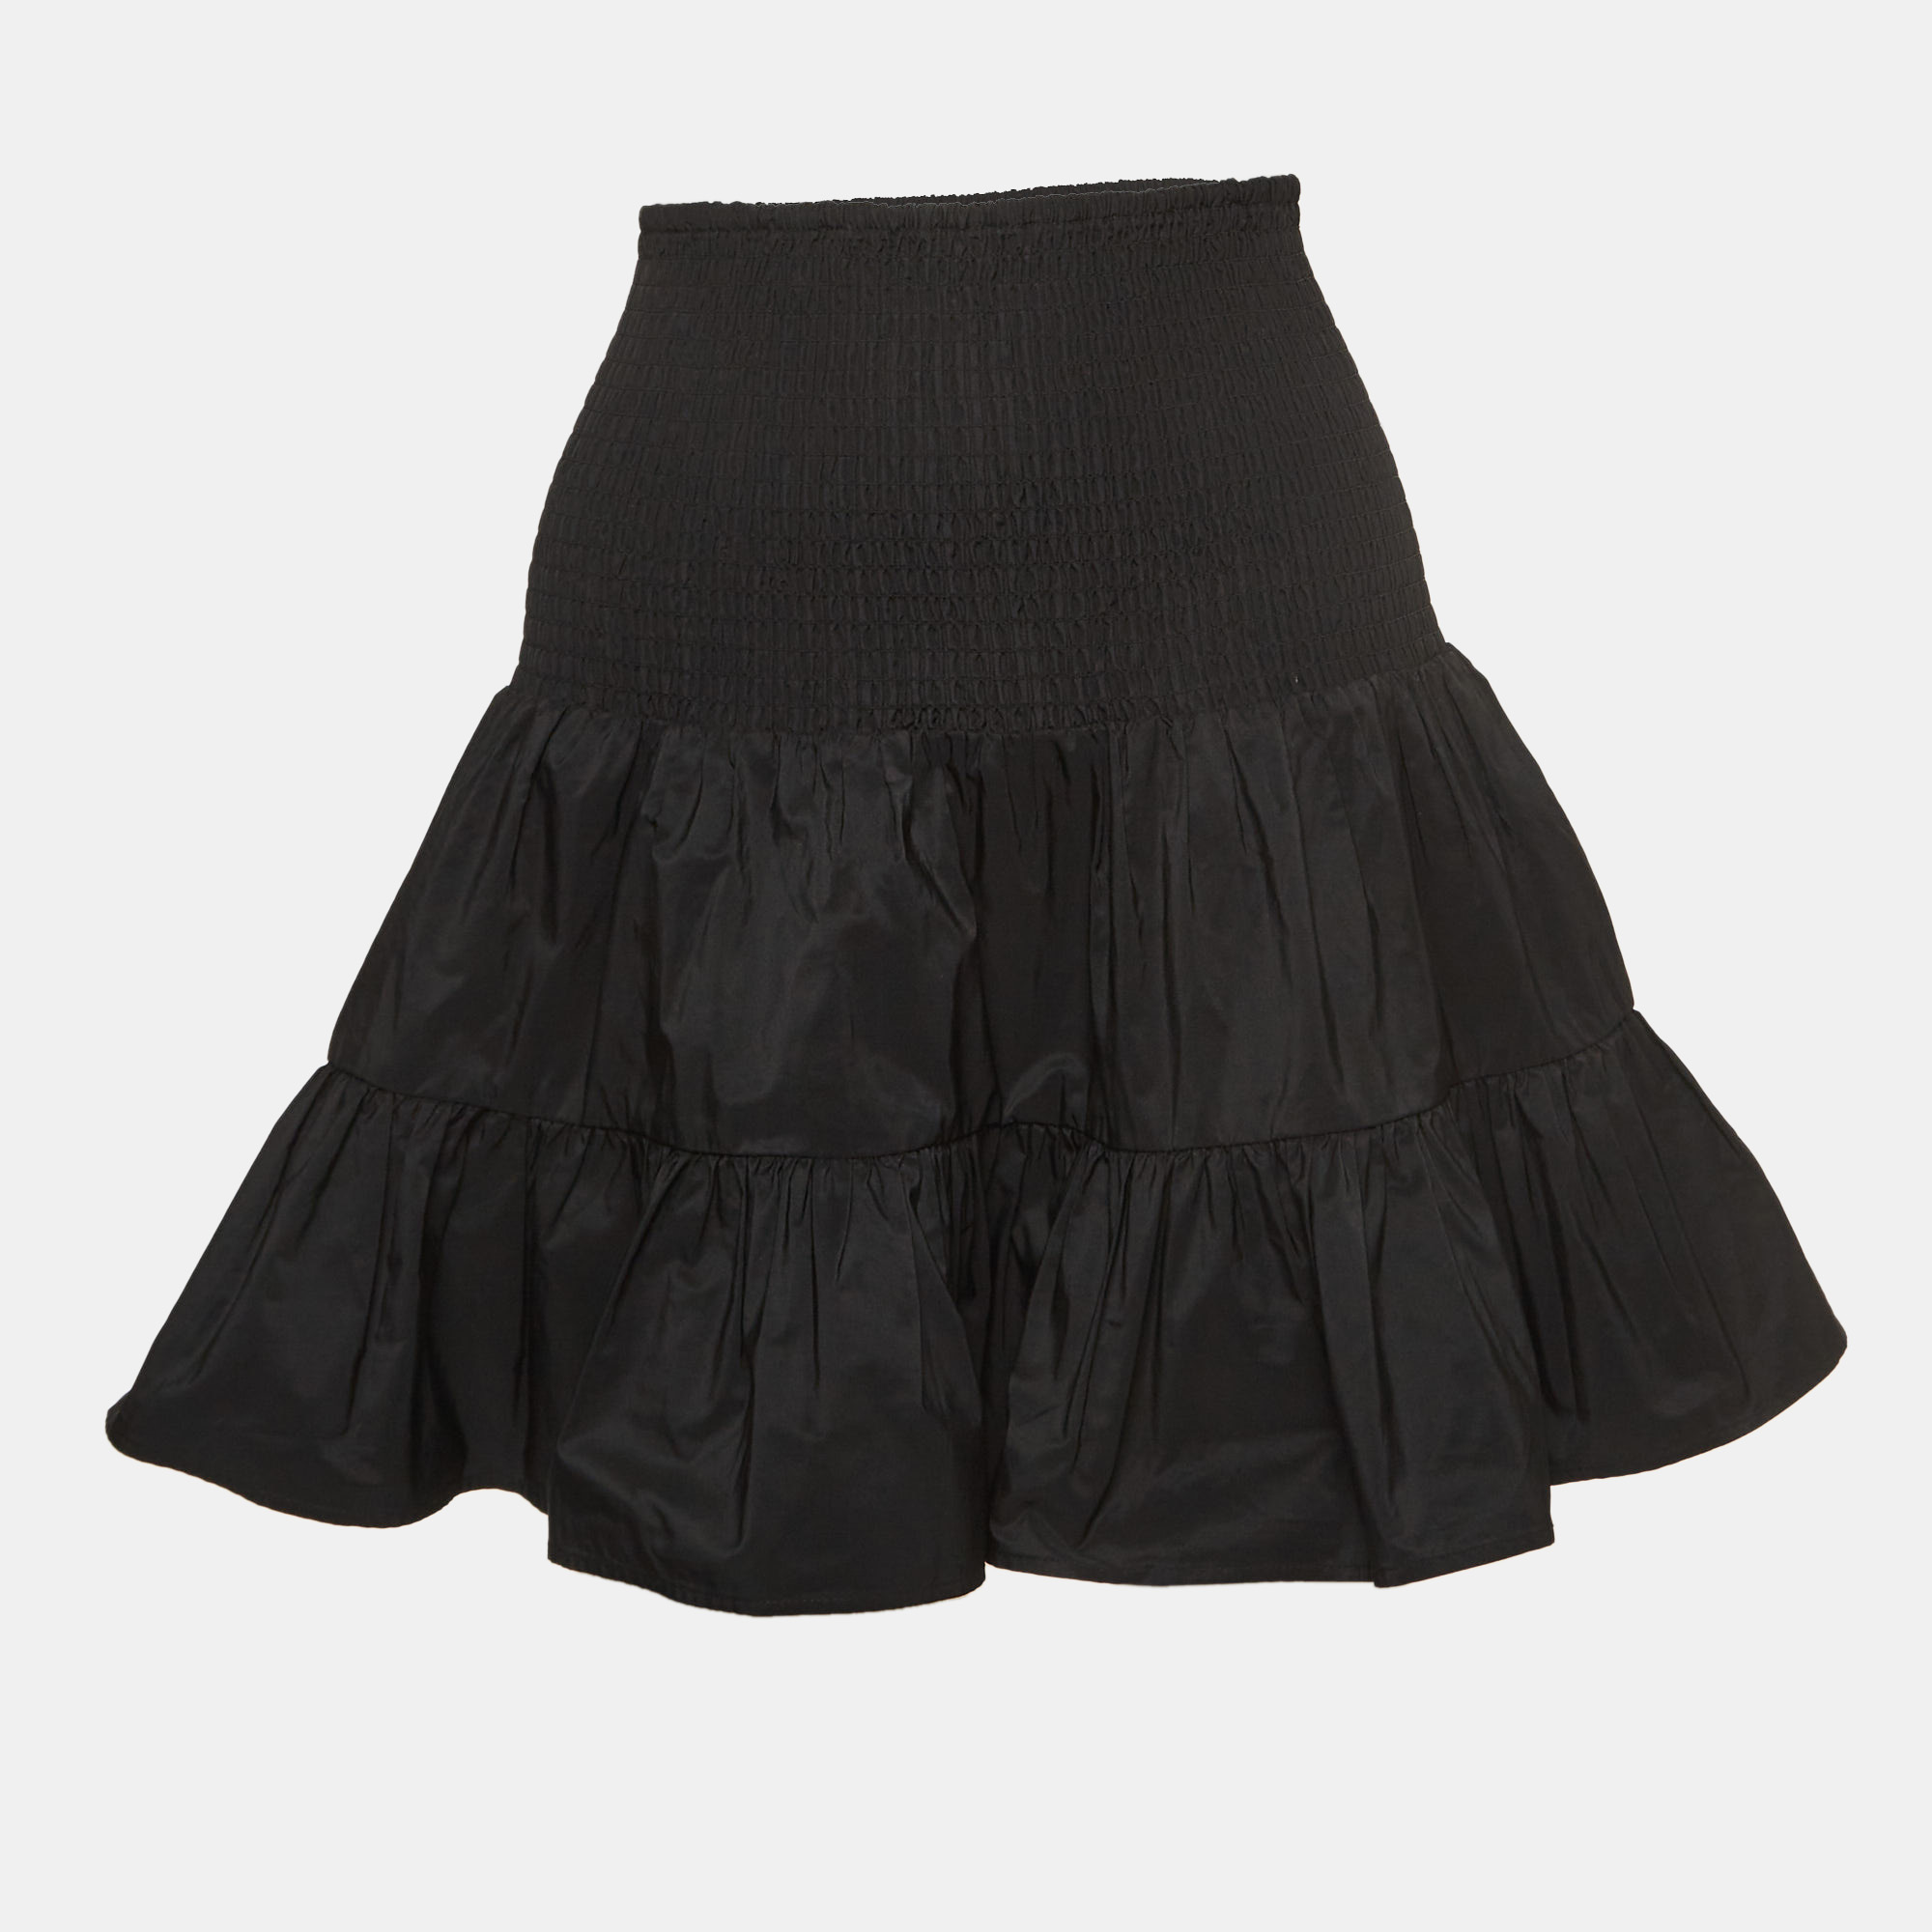 Maje black synthetic smocked detail tiered mini skirt s